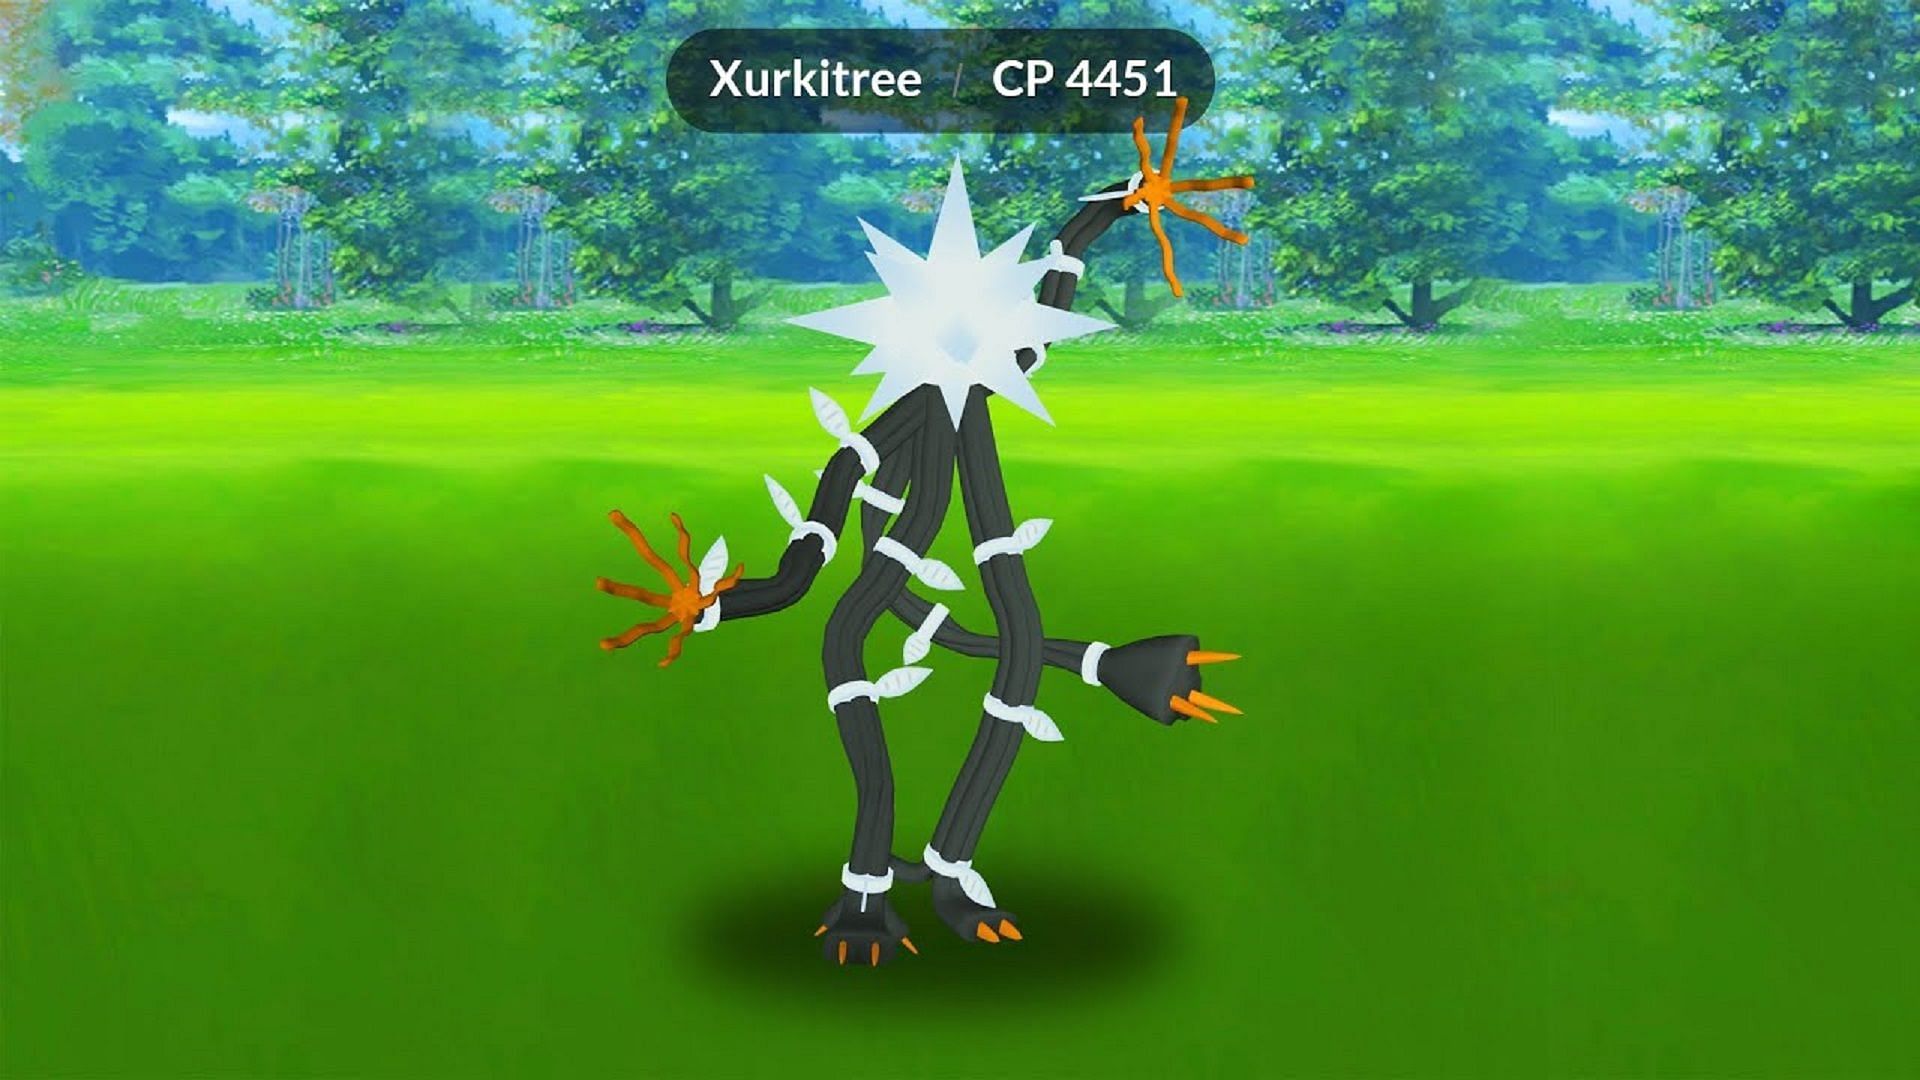 A capable Electric-type Pokemon like Xurkitree should deal great damage to Lugia in Pokemon GO (Image via Poke Daxi/YouTube)